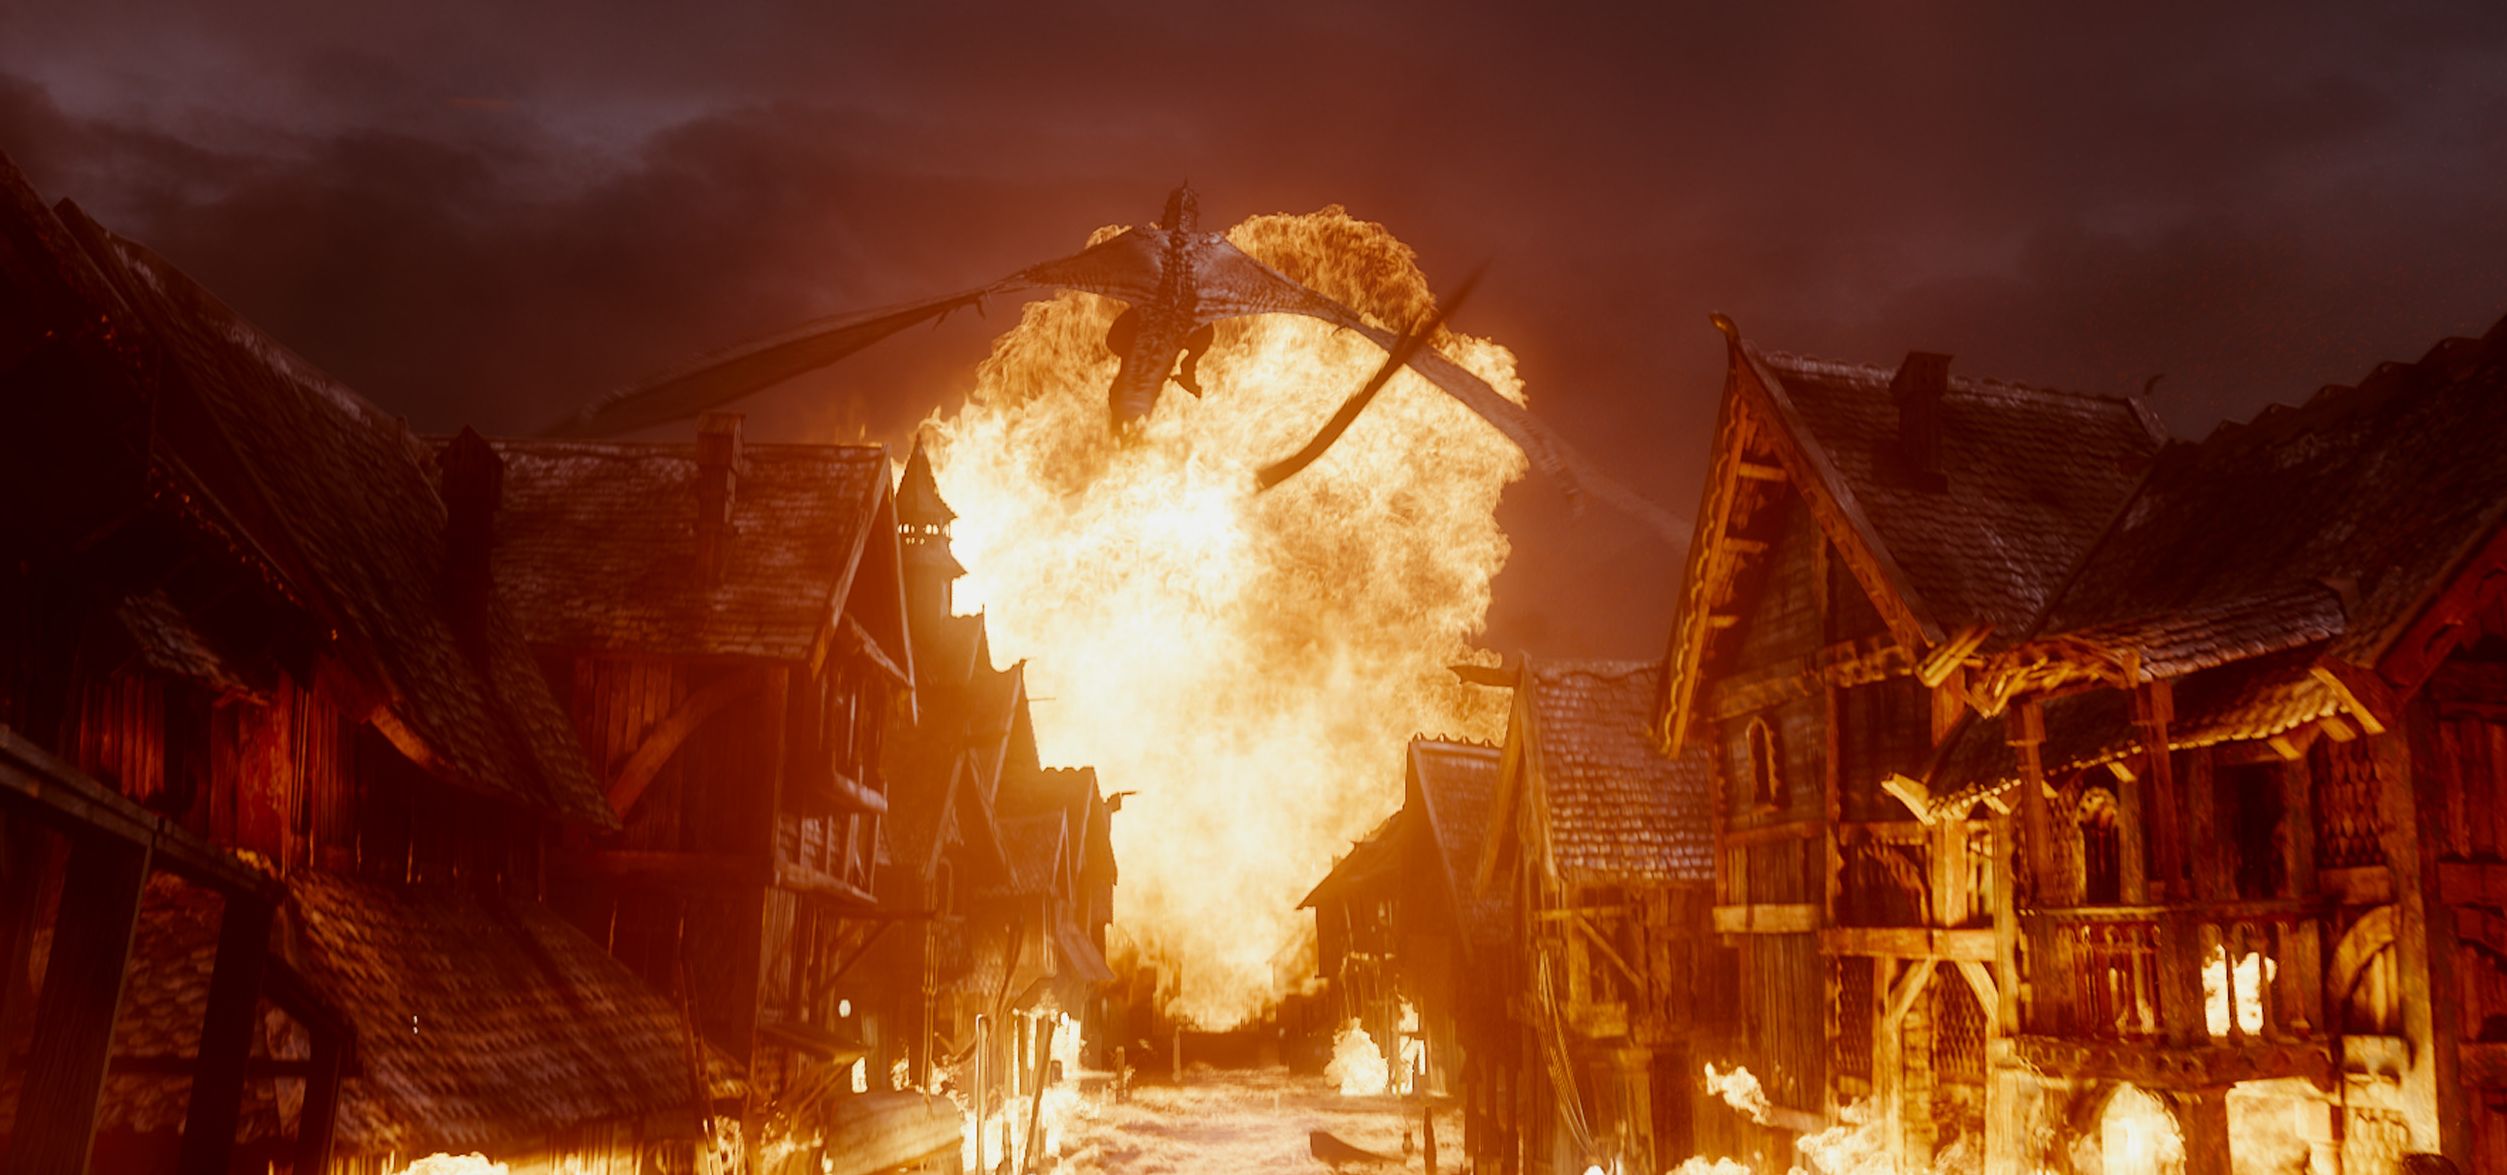 Dragon Smaug burns down village in The Battle of the Five Ar